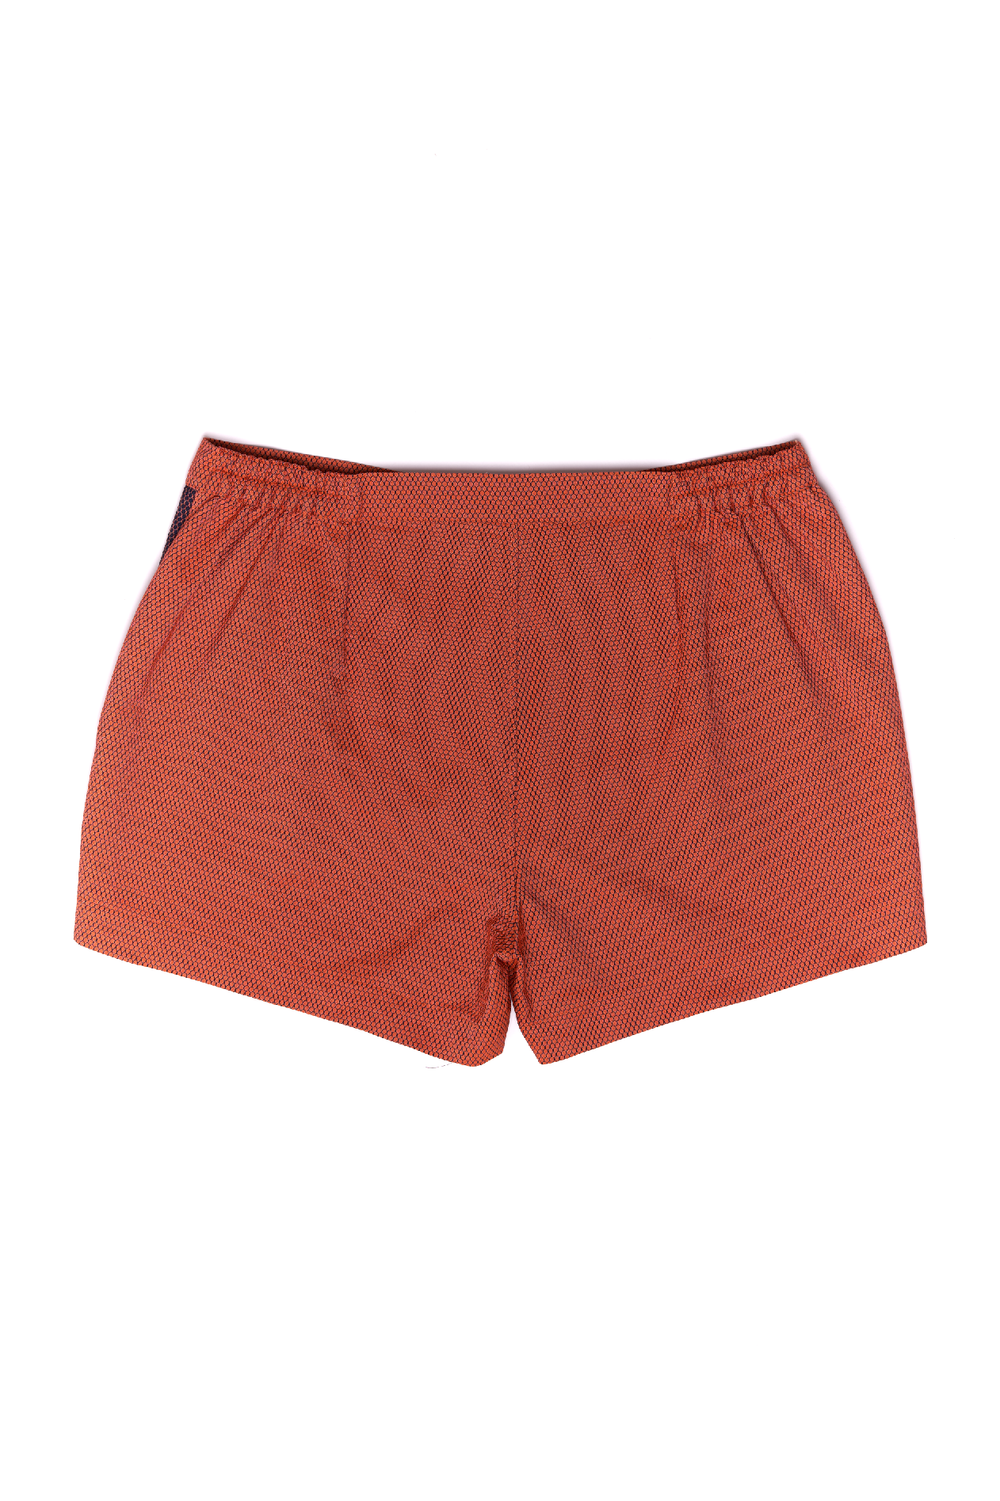 Men's red patterned boxer shorts with elastic waistband